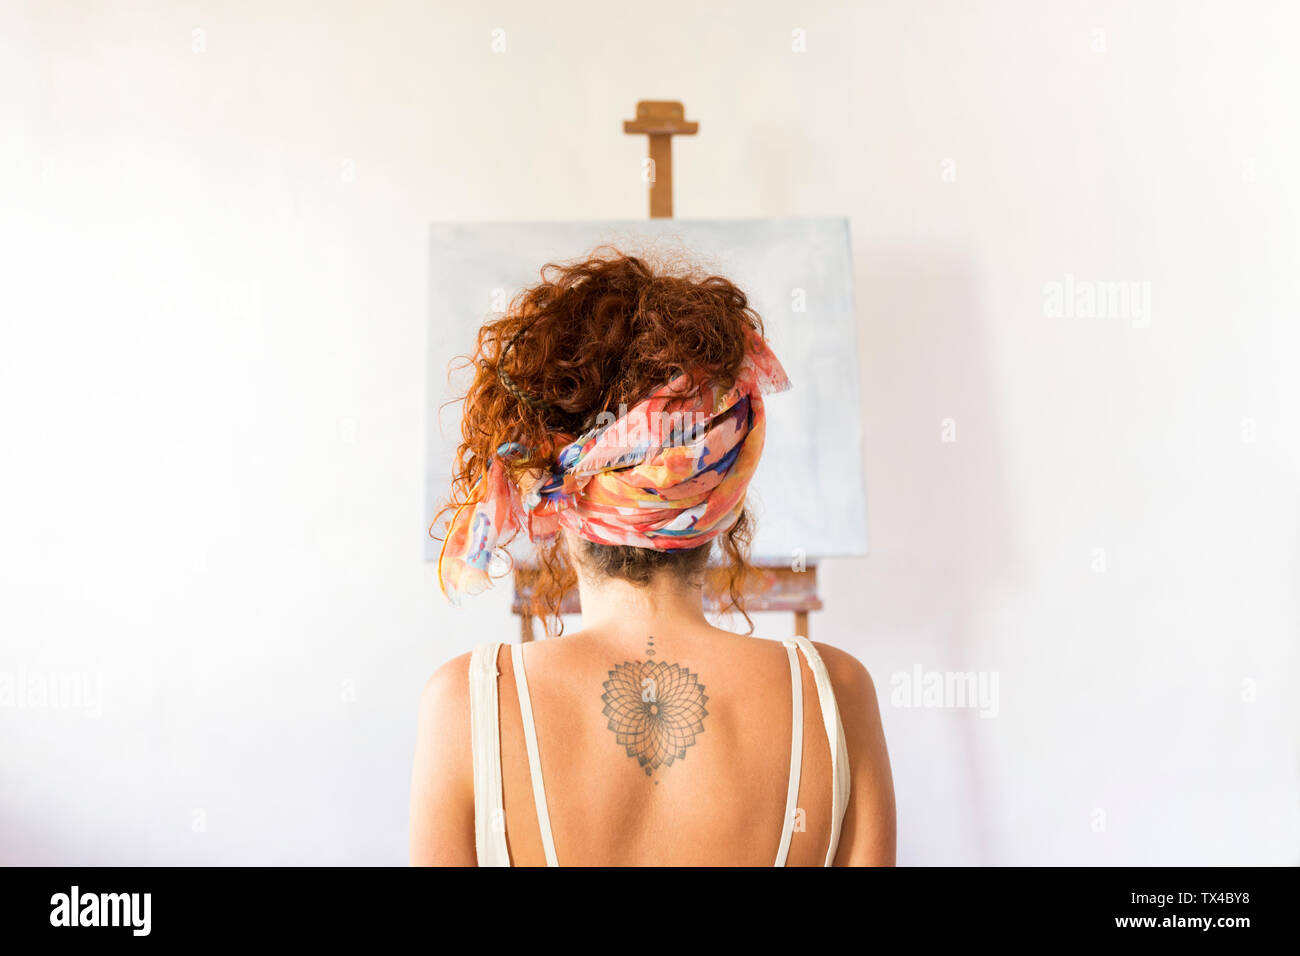 Rear view of young female painter in art studio in front of empty canvas Stock Photo